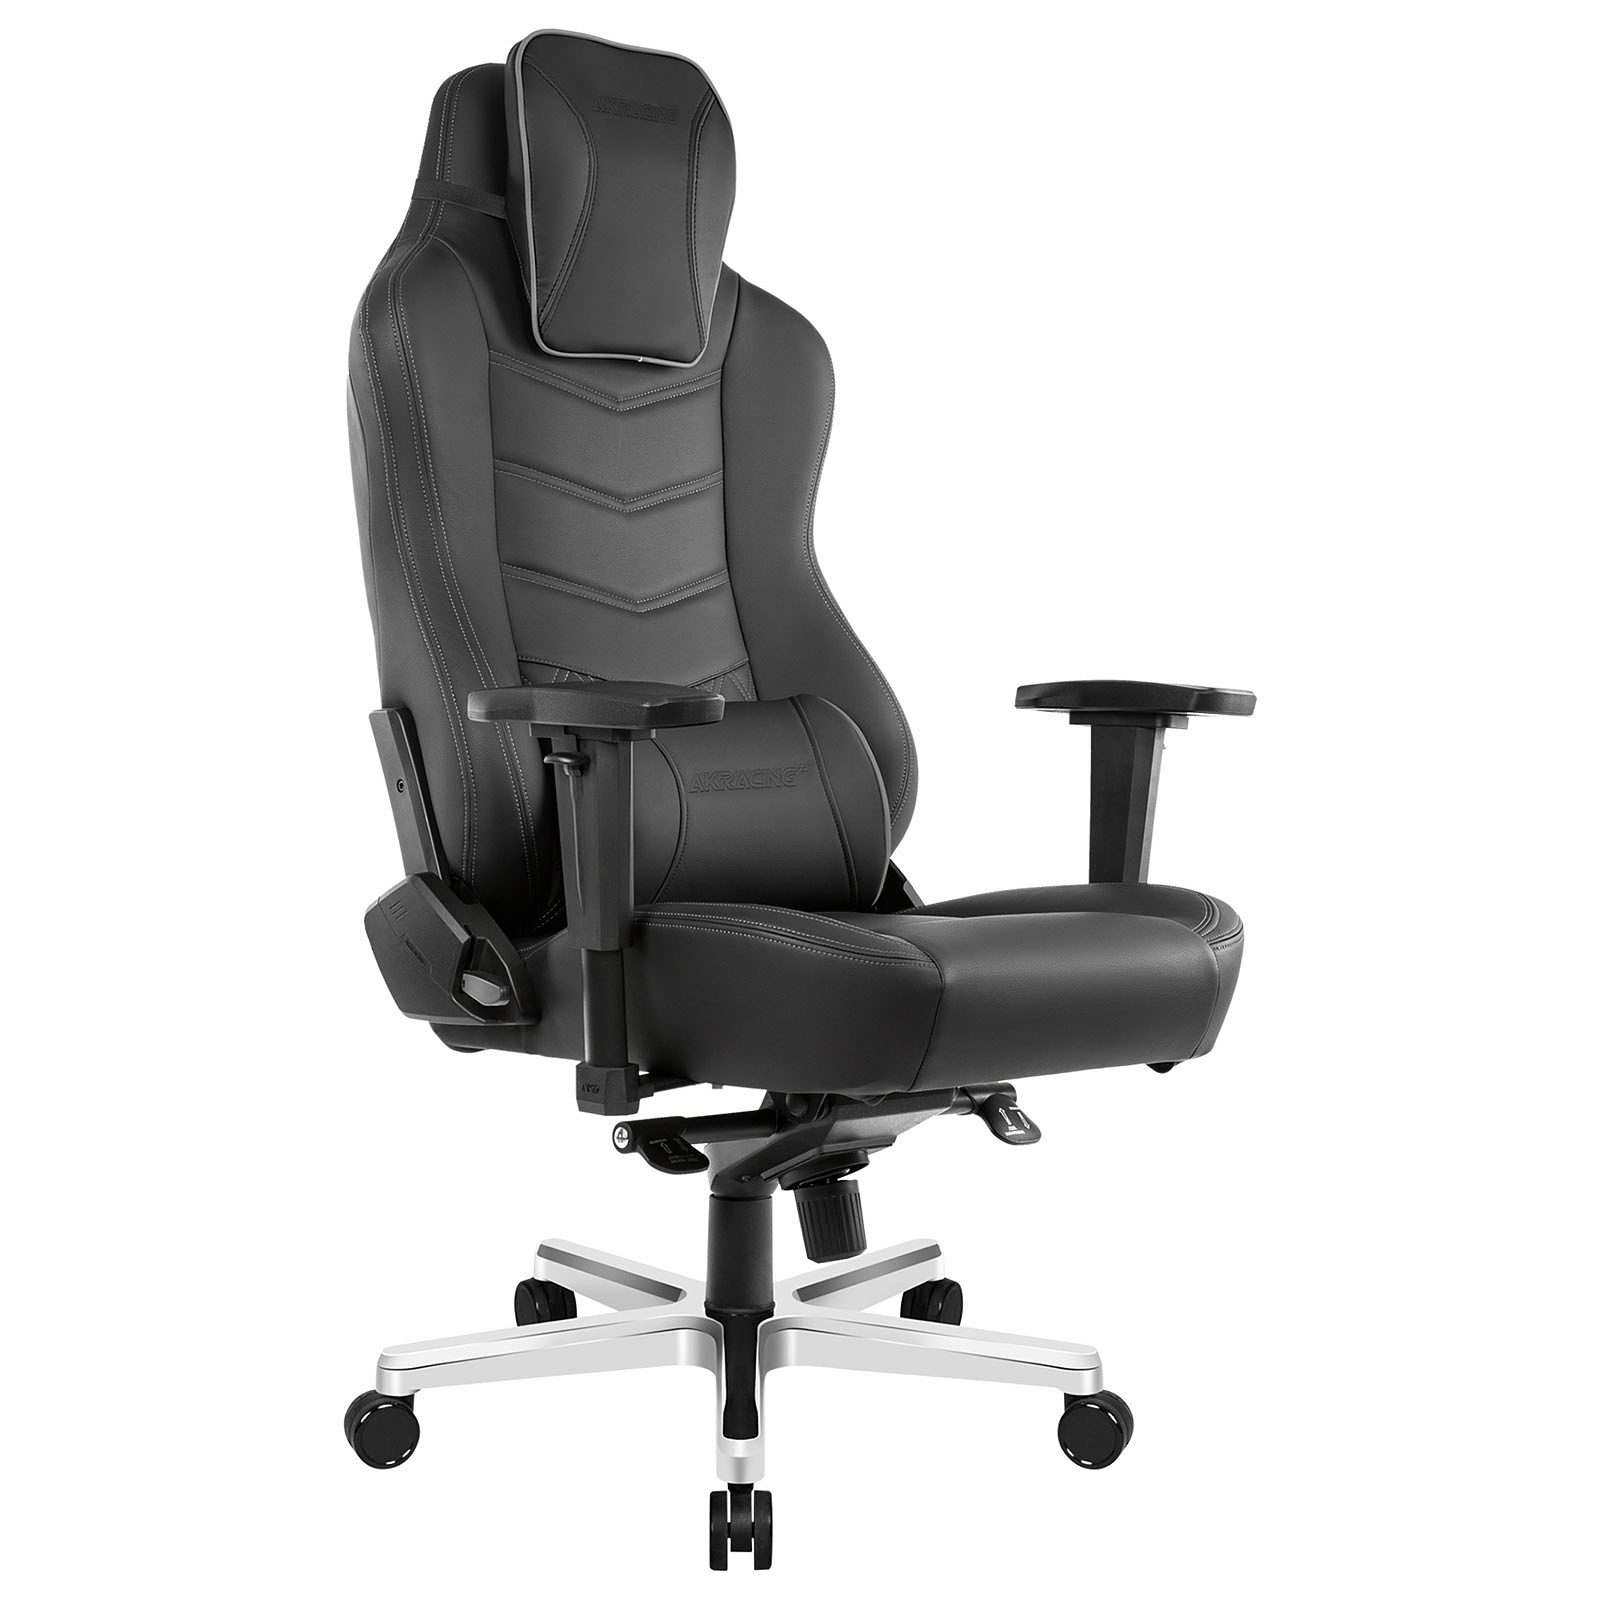 AKRacing Onyx Deluxe - Fauteuil gamer AKRacing - Occasion